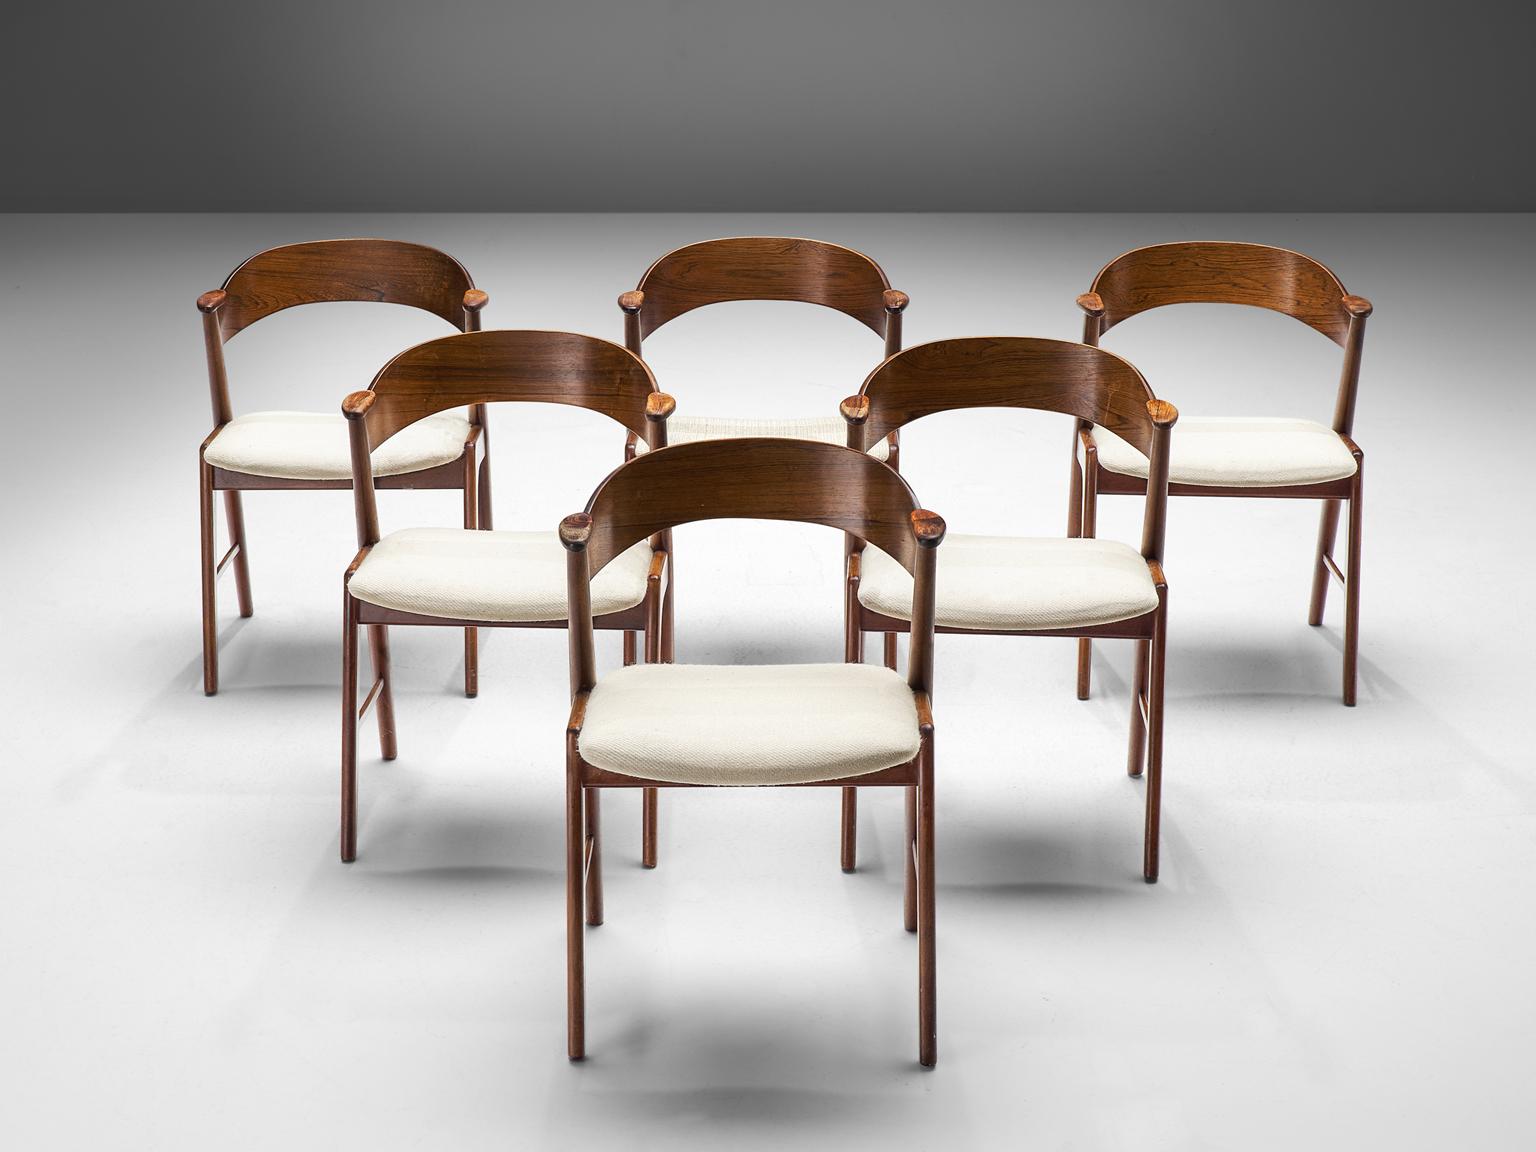 Kai Kristiansen for KS Møbler, set of 18 dining chairs, rosewood, fabric, Denmark 1950s. 

The chairs show beautiful and well designed lines and joints. The curved back and armrests are mounted on the oblique rear legs, which provides an open,